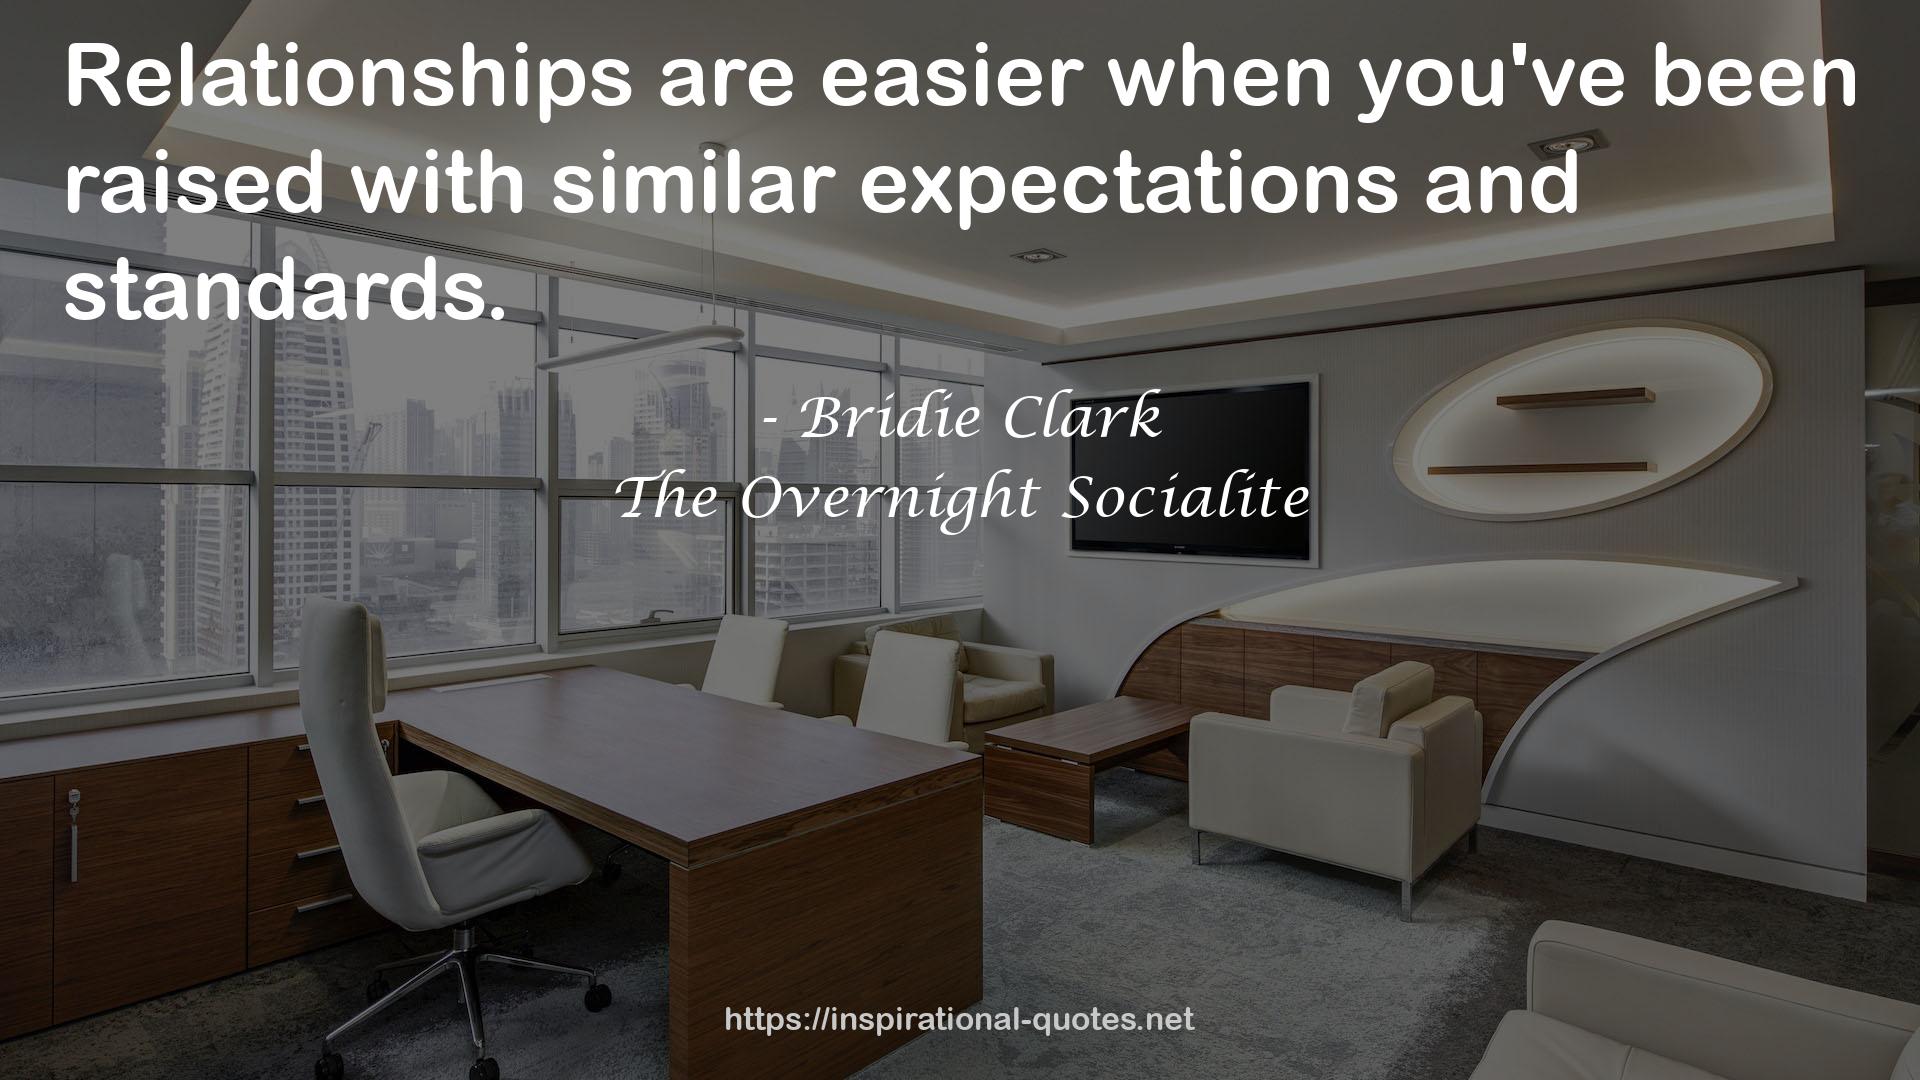 The Overnight Socialite QUOTES